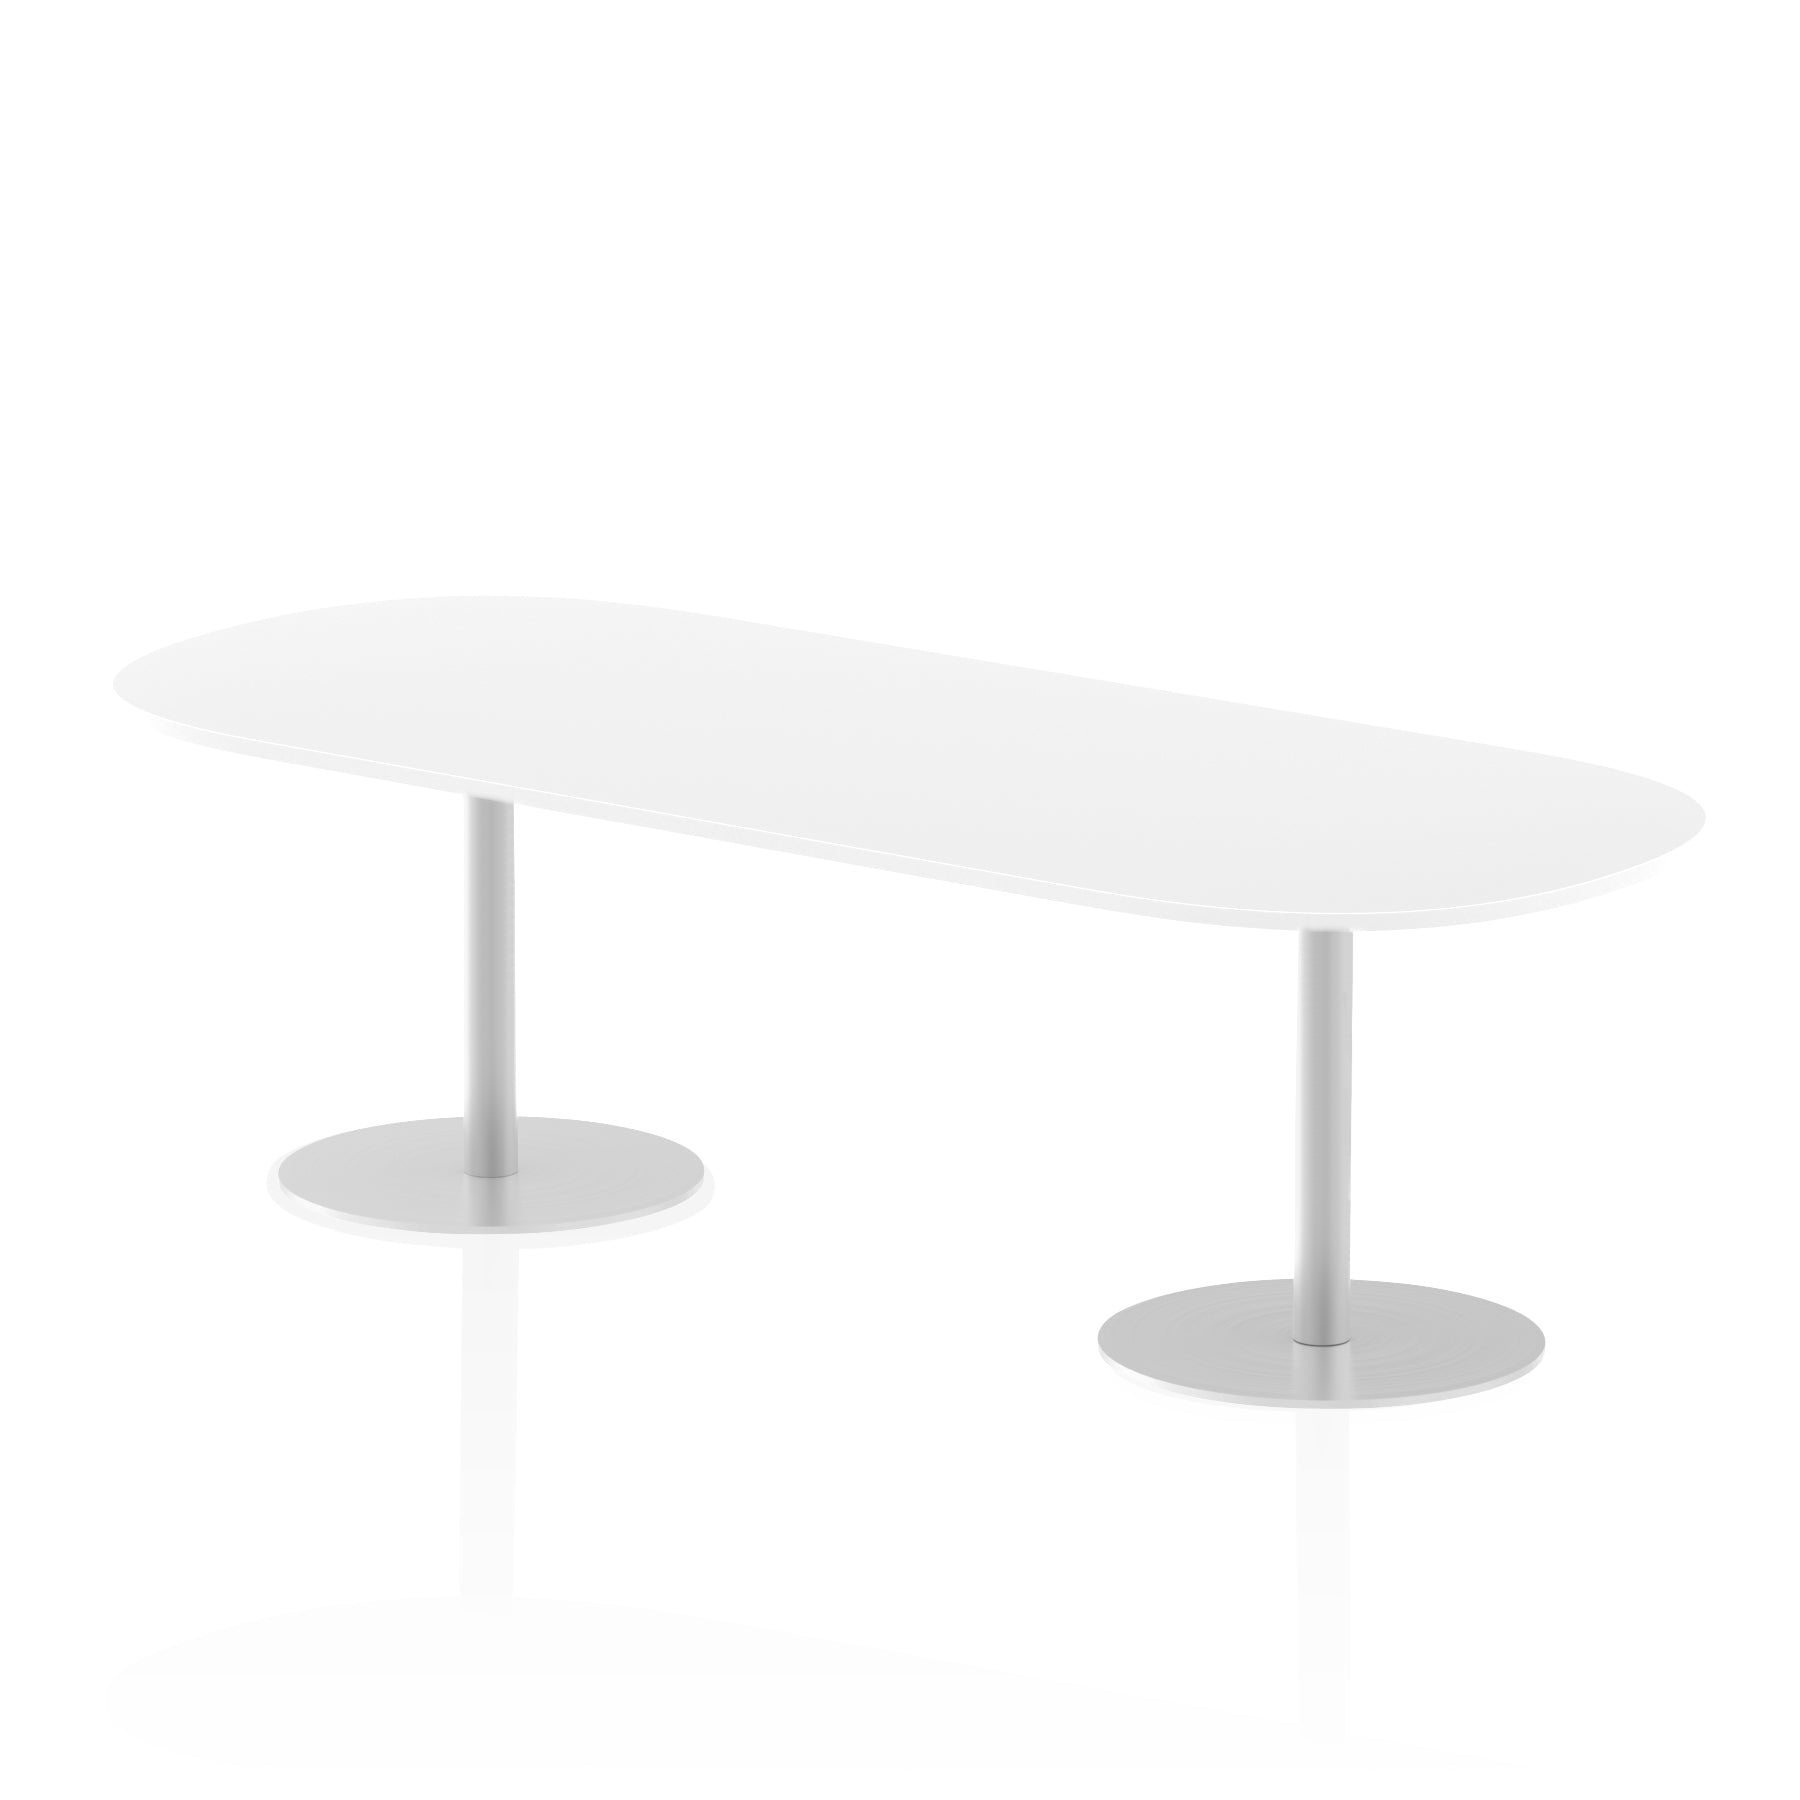 Italia D-End Boardroom Table - MFC Material, Self-Assembly, 5-Year Guarantee, Bistro Leg, Silver Frame, 1800x1000 or 2400x1000mm